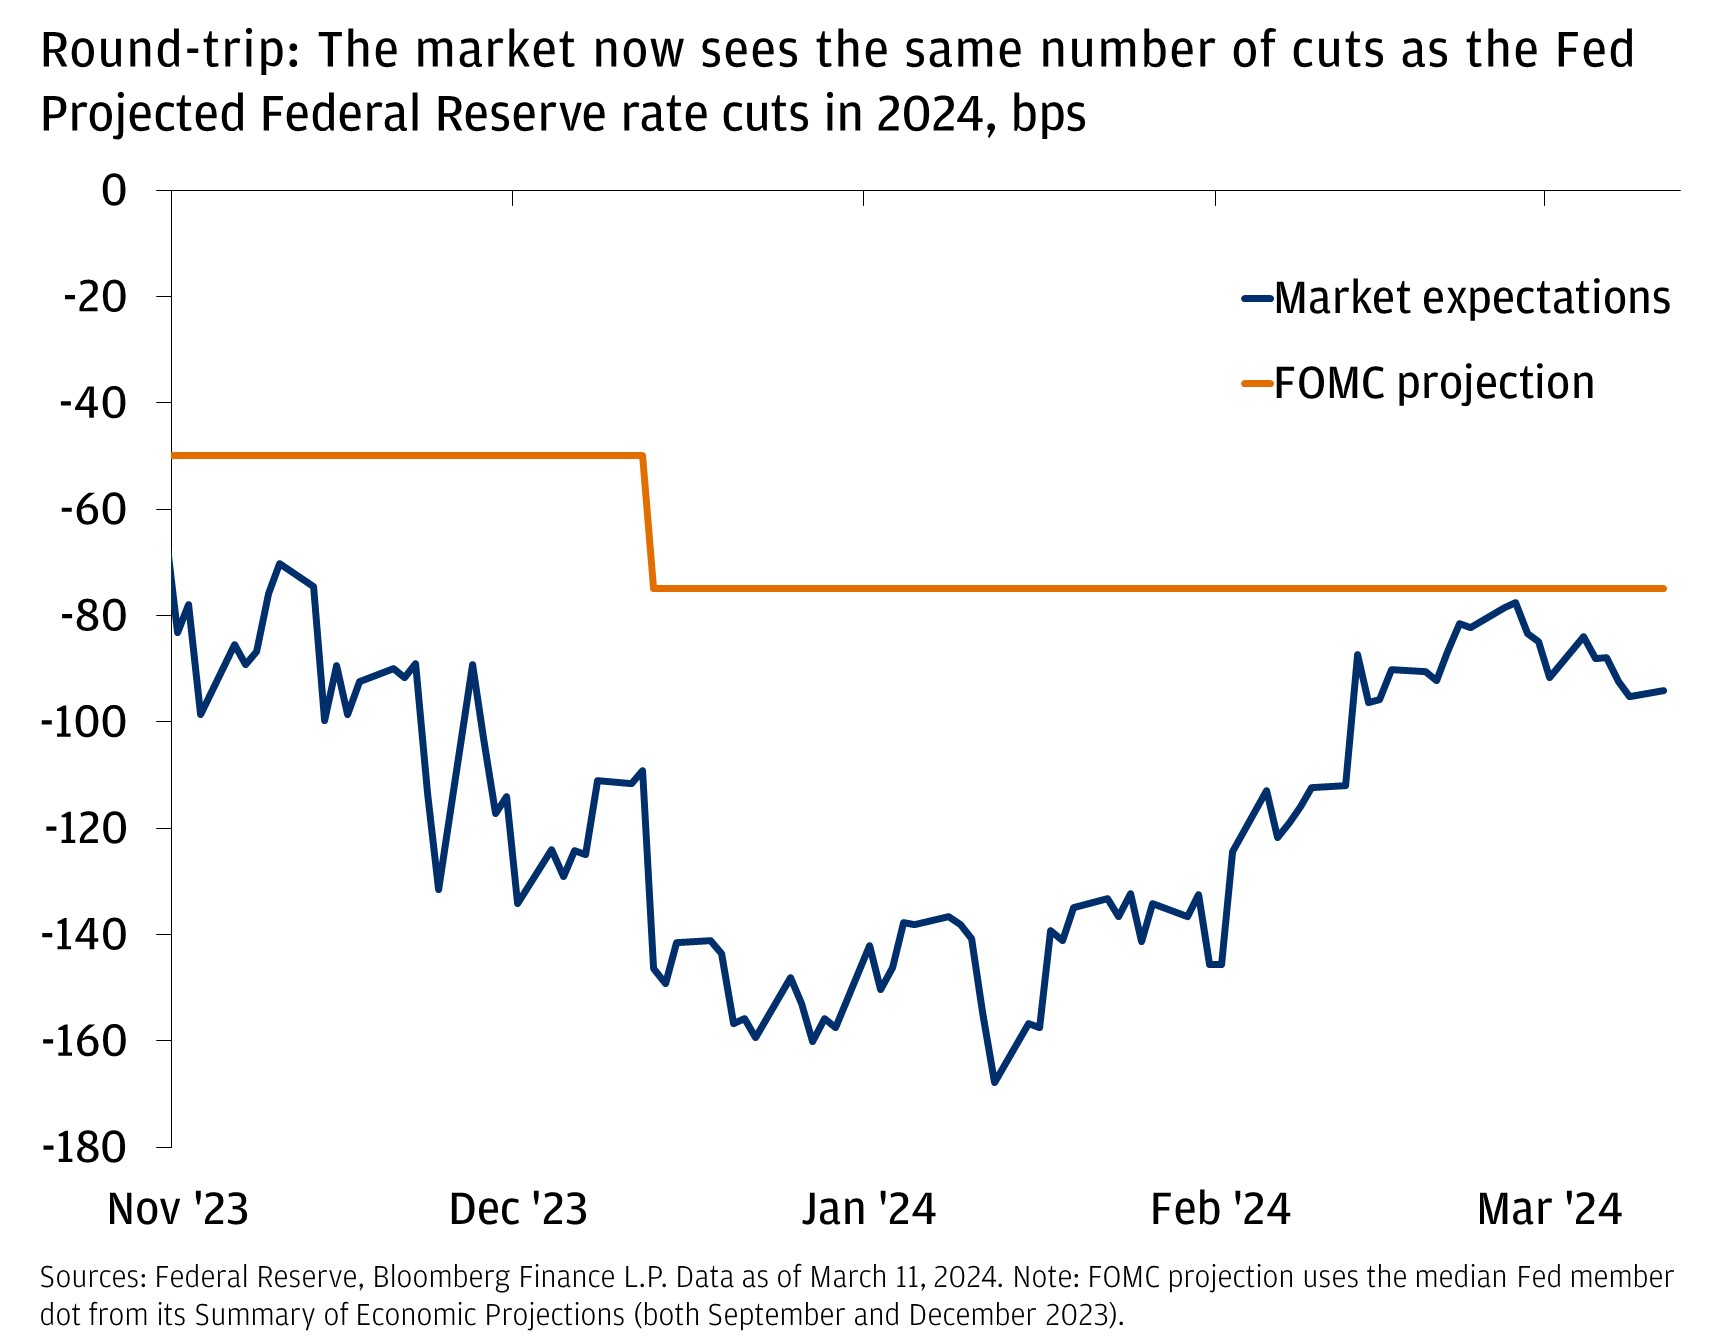 This line chart shows the projected number of Federal Reserve rate cuts in 2024 based upon market expectations and the FOMC projection from November 1, 2023 to March 8, 2024.